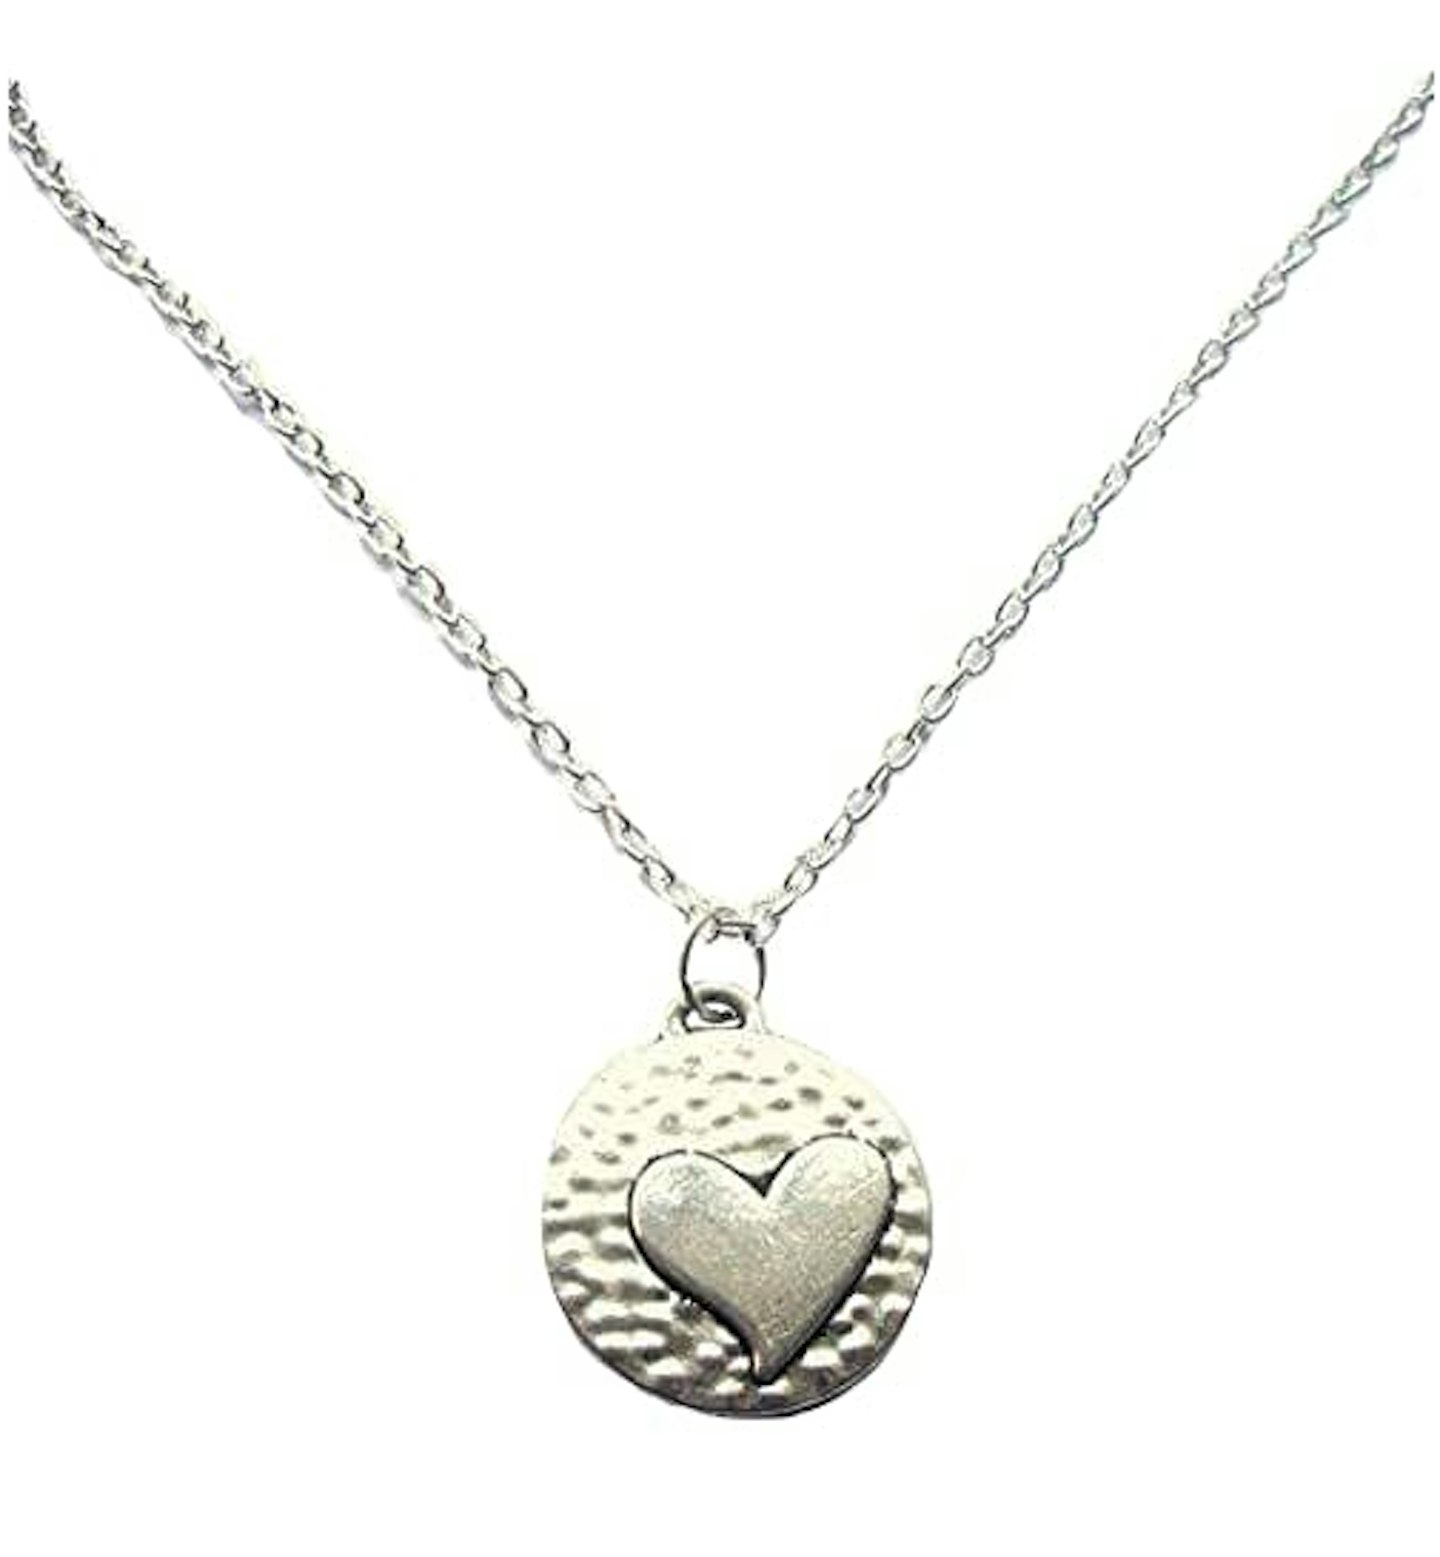 Heart Disc Necklace 18 Inch Chain Silver Plated